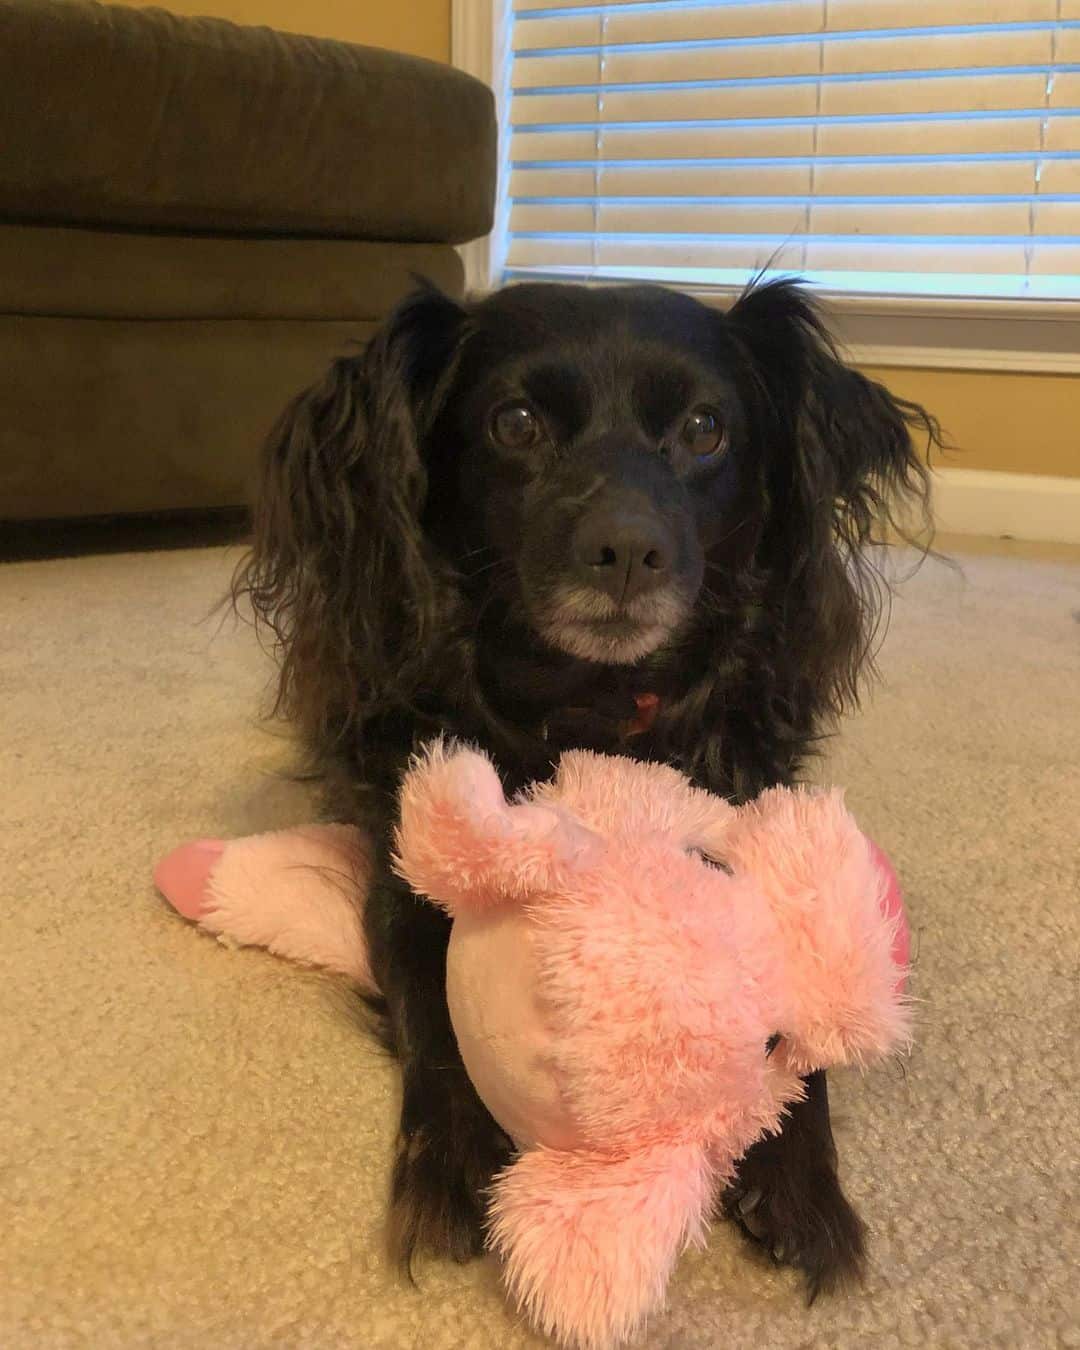 Cocker Spaniel Dachshund Mix plays with a toy